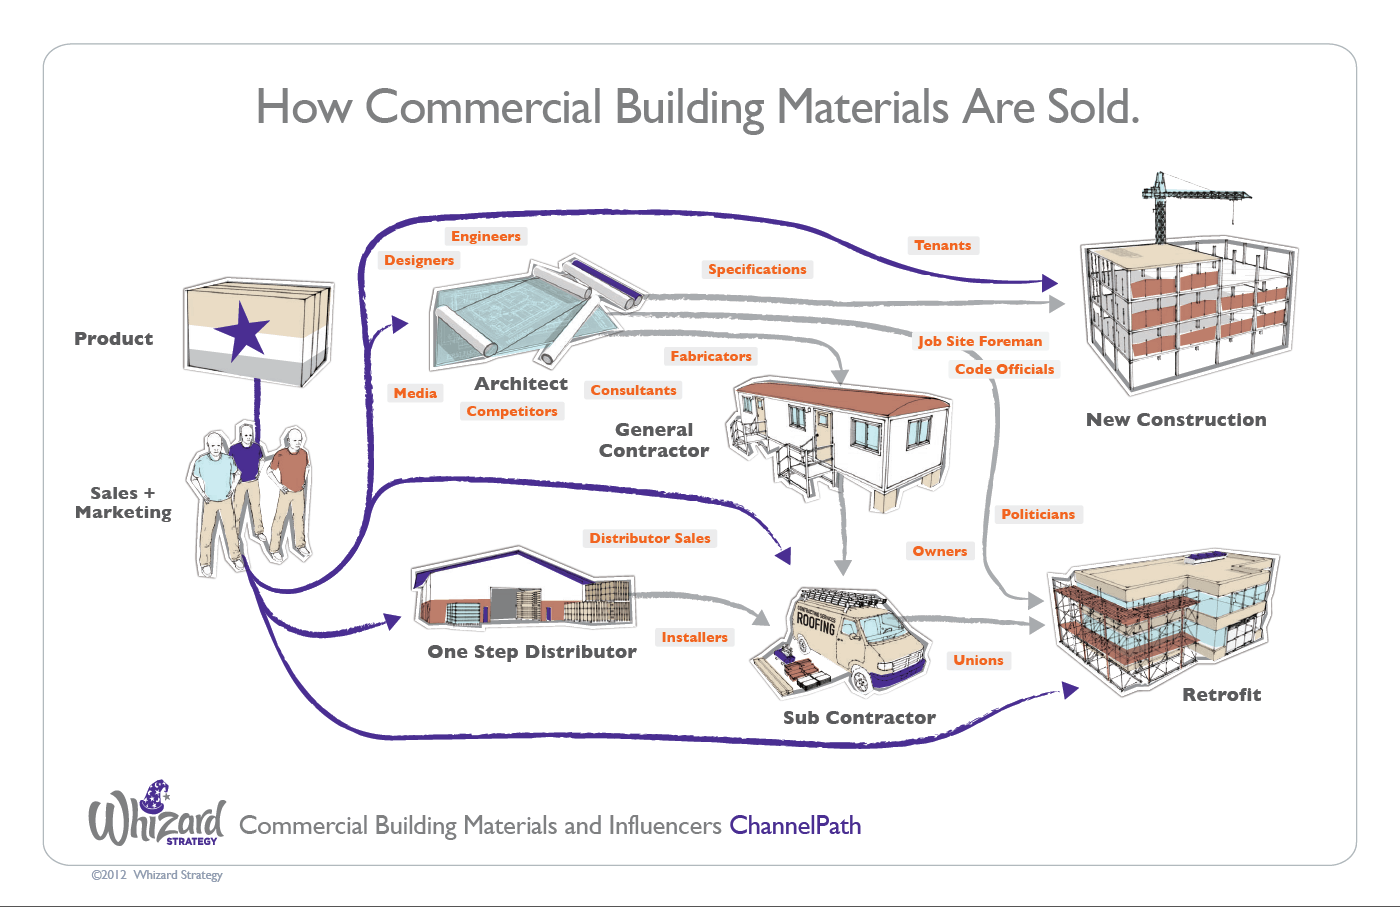 How Commercial Building Materials are Sold